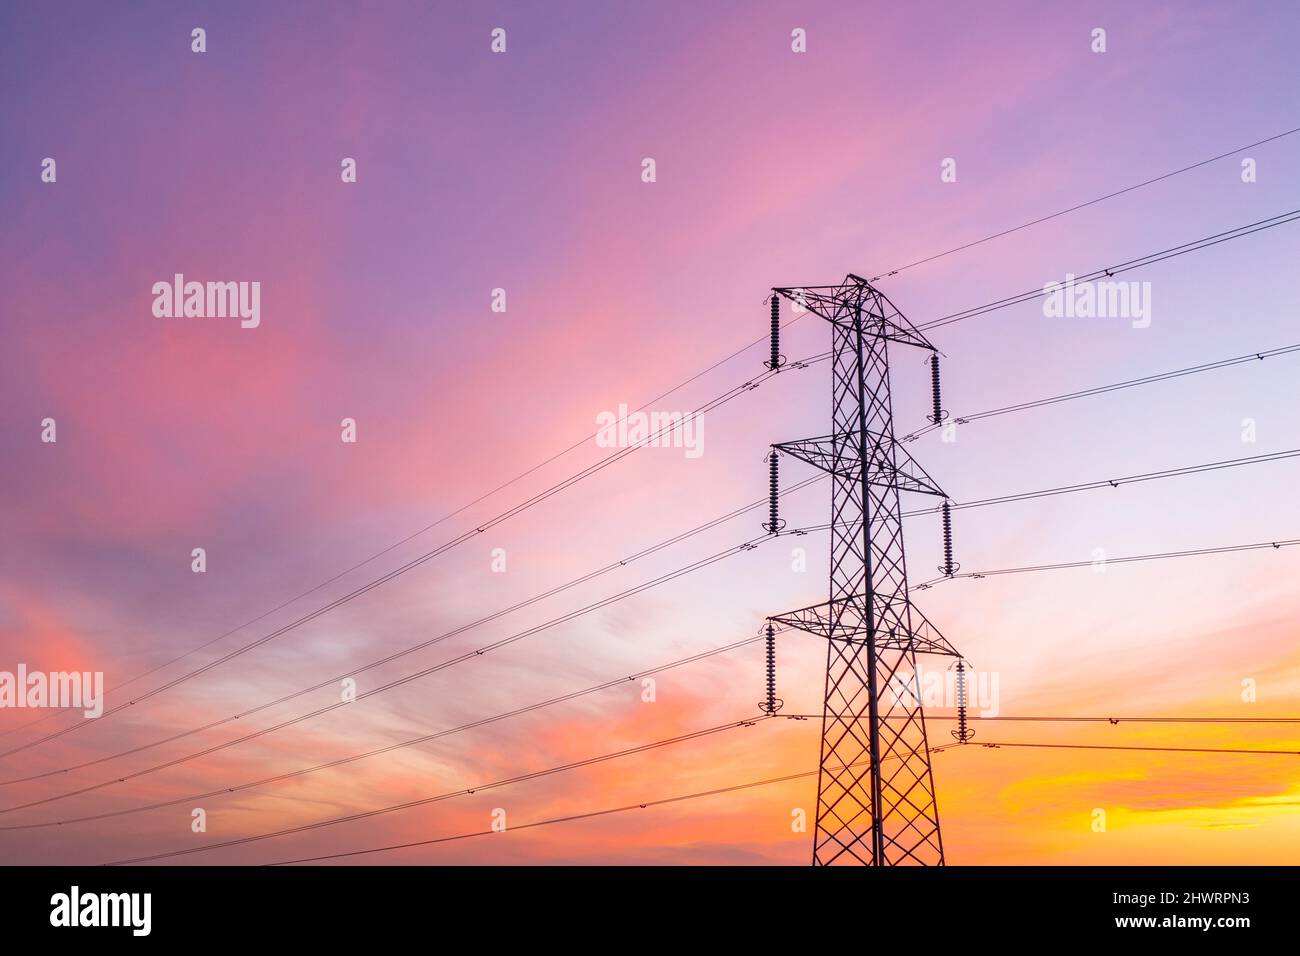 A low angle view of a metal electricity pylon carrying wires with large amounts of energy to supply business and homes with energy and copy space Stock Photo